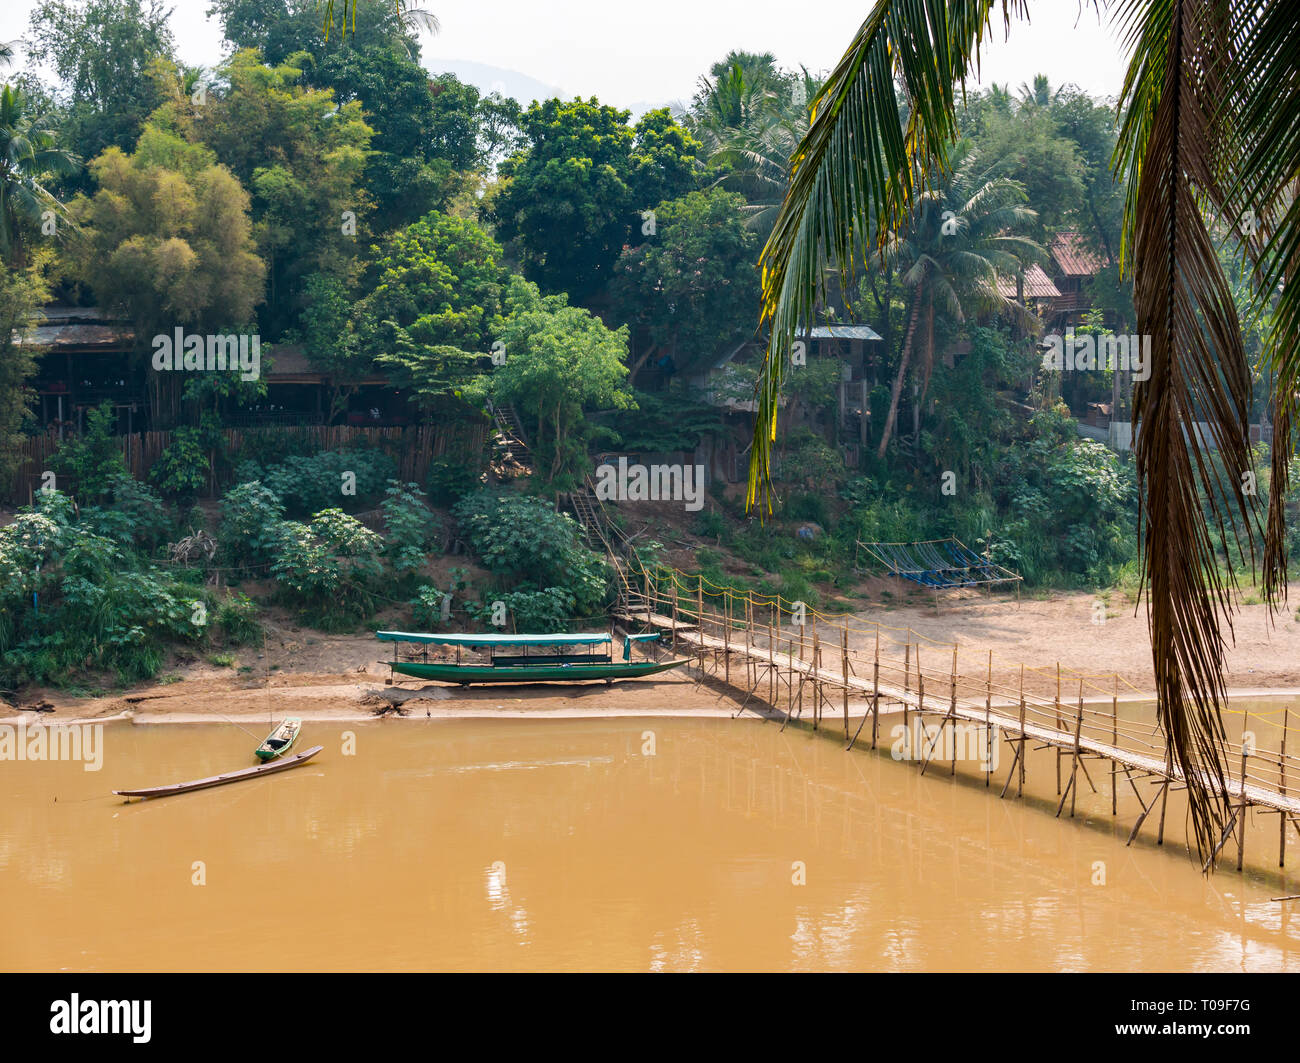 Bamboo cane bridge over Nam Kahn river tributary of Mekong with traditional canopied dugout canoe riverboat, Luang Prabang, Laos, Indochina, SE Asia Stock Photo